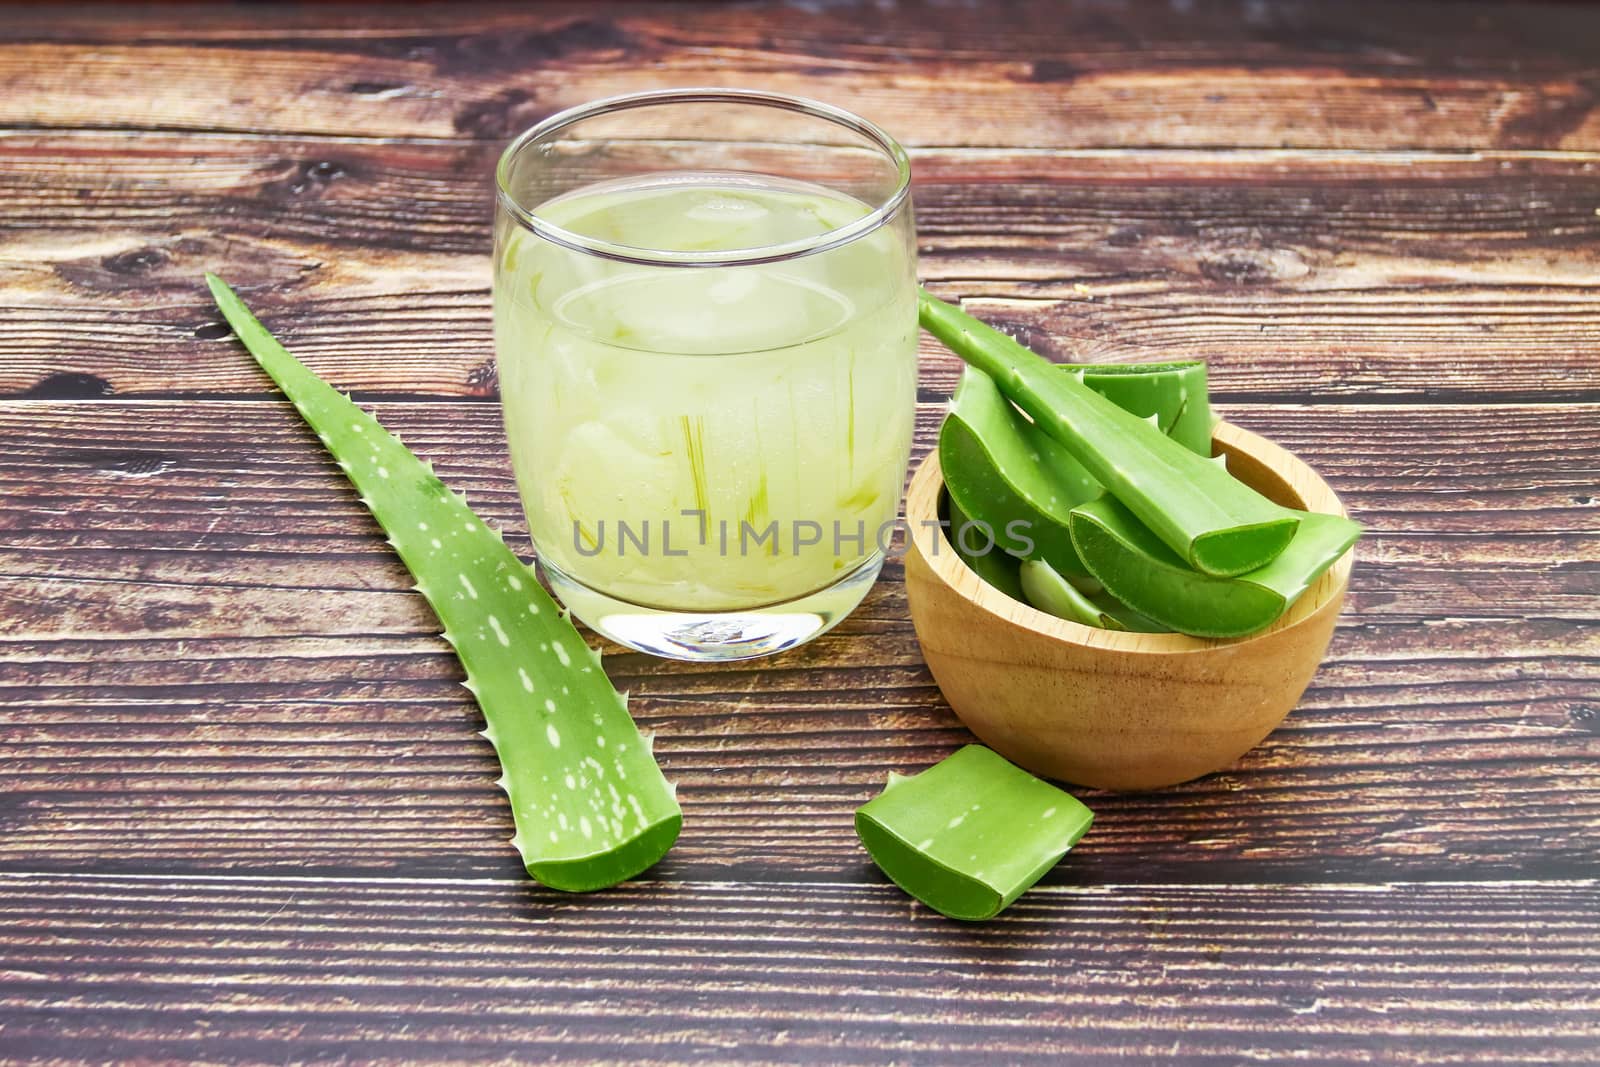 Aloe Vera for drinking on wood table 